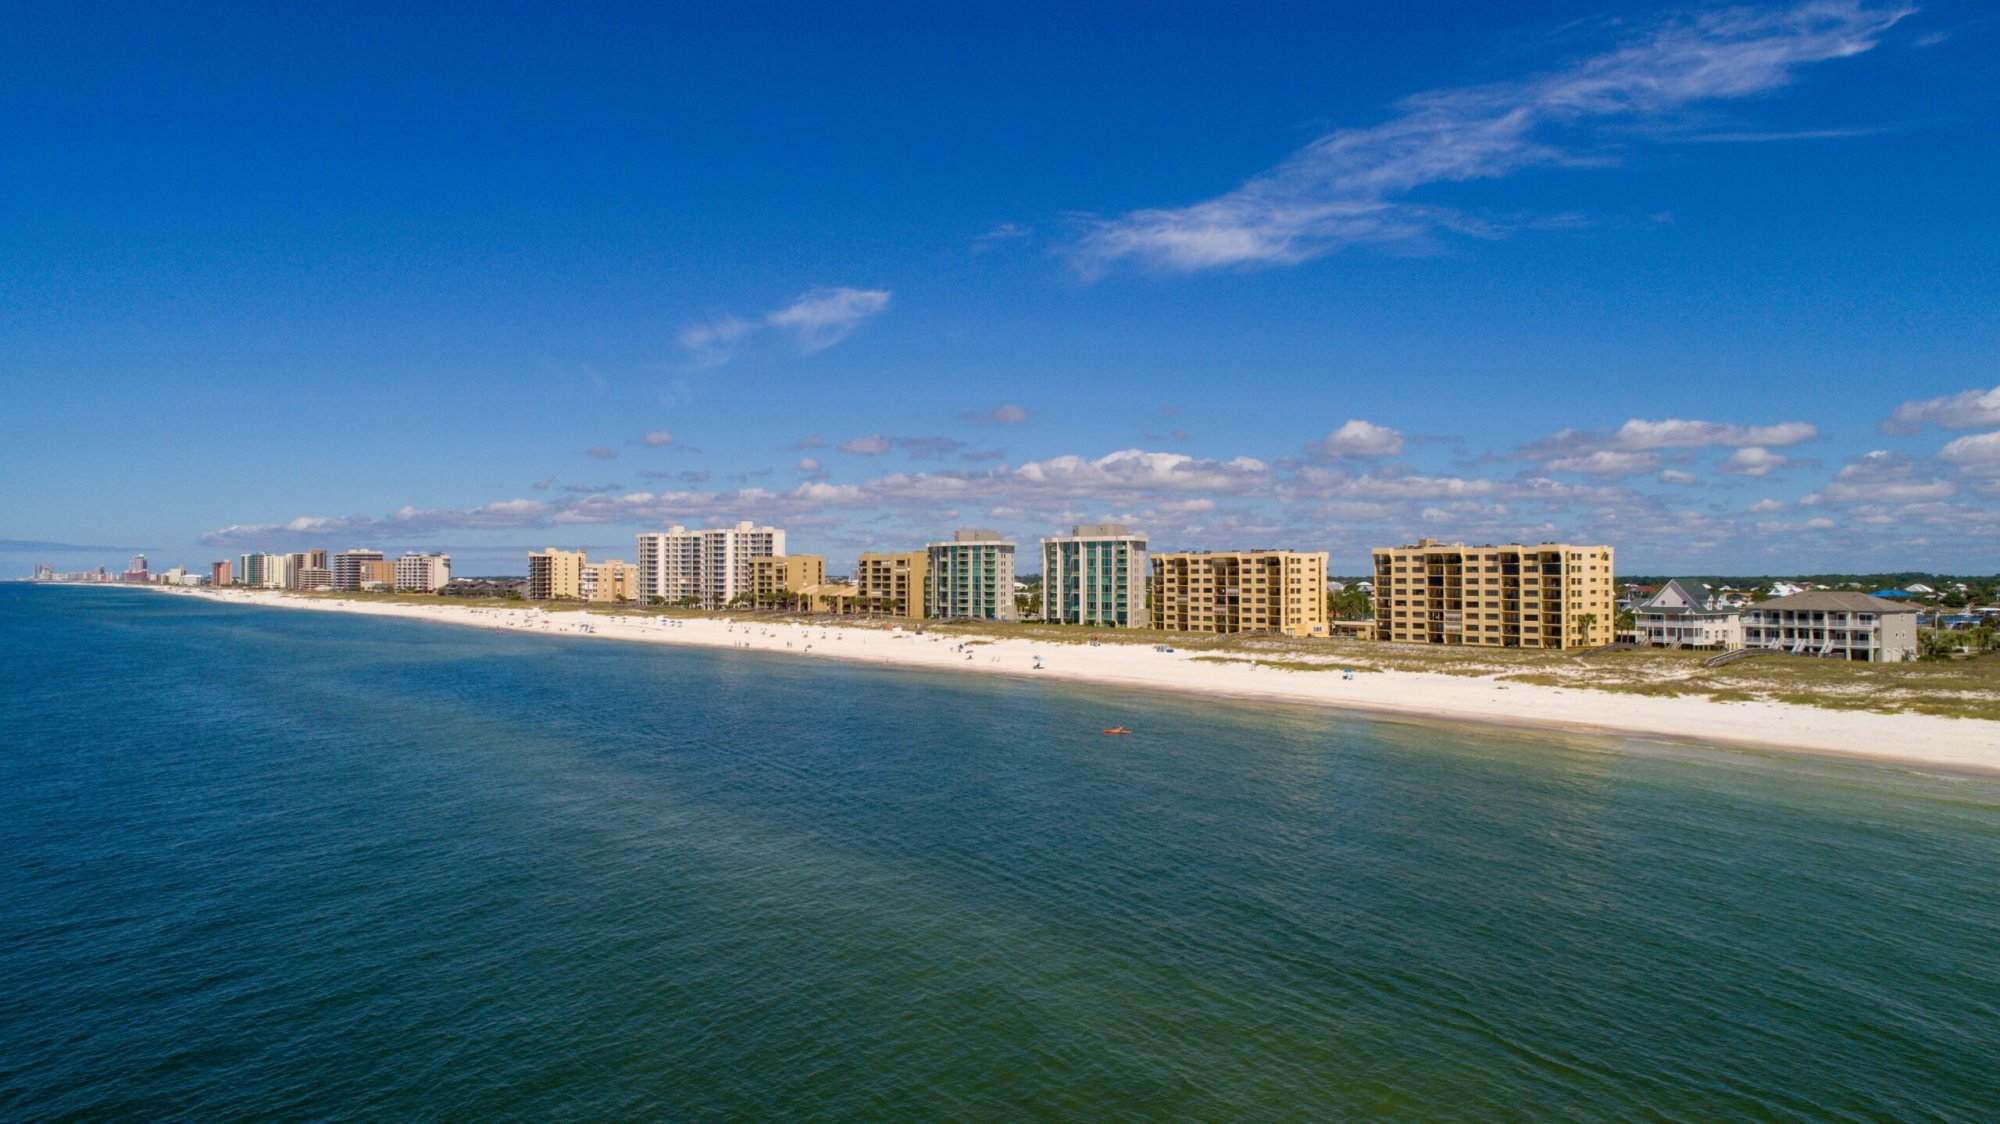 An aerial view of the beach and buildings.